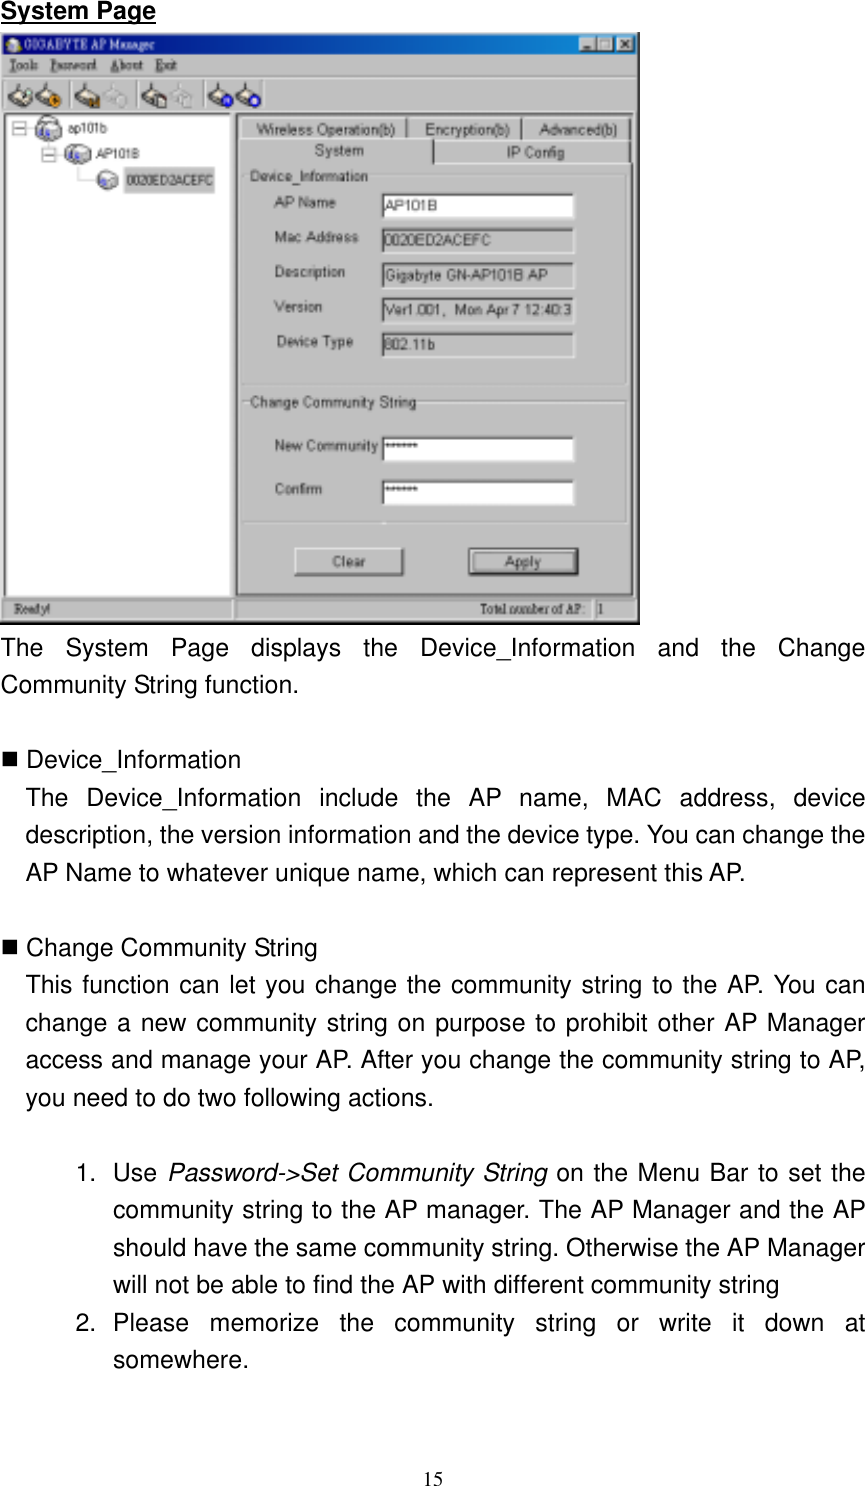 15  System Page  The System Page displays the Device_Information and the Change Community String function.     Device_Information The Device_Information include the AP name, MAC address, device description, the version information and the device type. You can change the AP Name to whatever unique name, which can represent this AP.   Change Community String   This function can let you change the community string to the AP. You can change a new community string on purpose to prohibit other AP Manager access and manage your AP. After you change the community string to AP, you need to do two following actions.    1. Use Password-&gt;Set Community String on the Menu Bar to set the community string to the AP manager. The AP Manager and the AP should have the same community string. Otherwise the AP Manager will not be able to find the AP with different community string   2. Please memorize the community string or write it down at somewhere.  